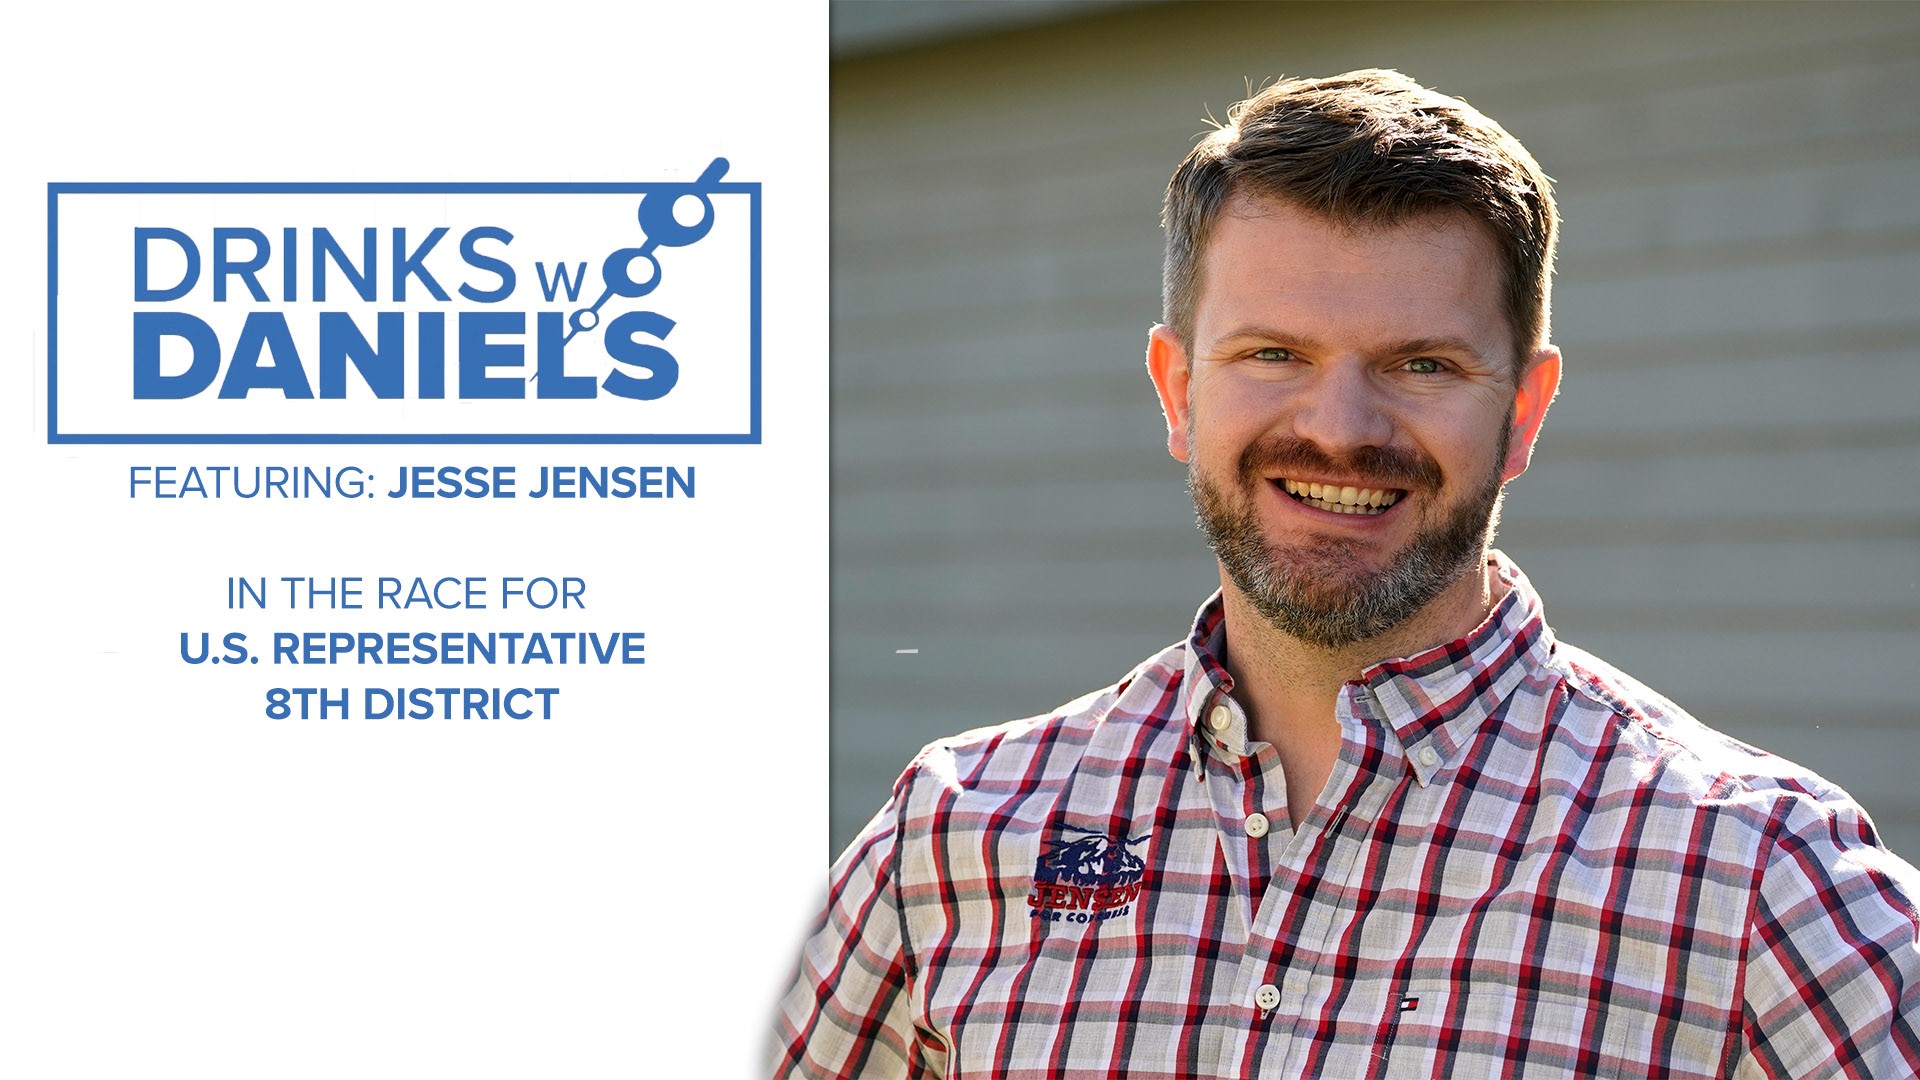 8th Congressional District challenger Jesse Jensen hopes to return the district to Republicans.